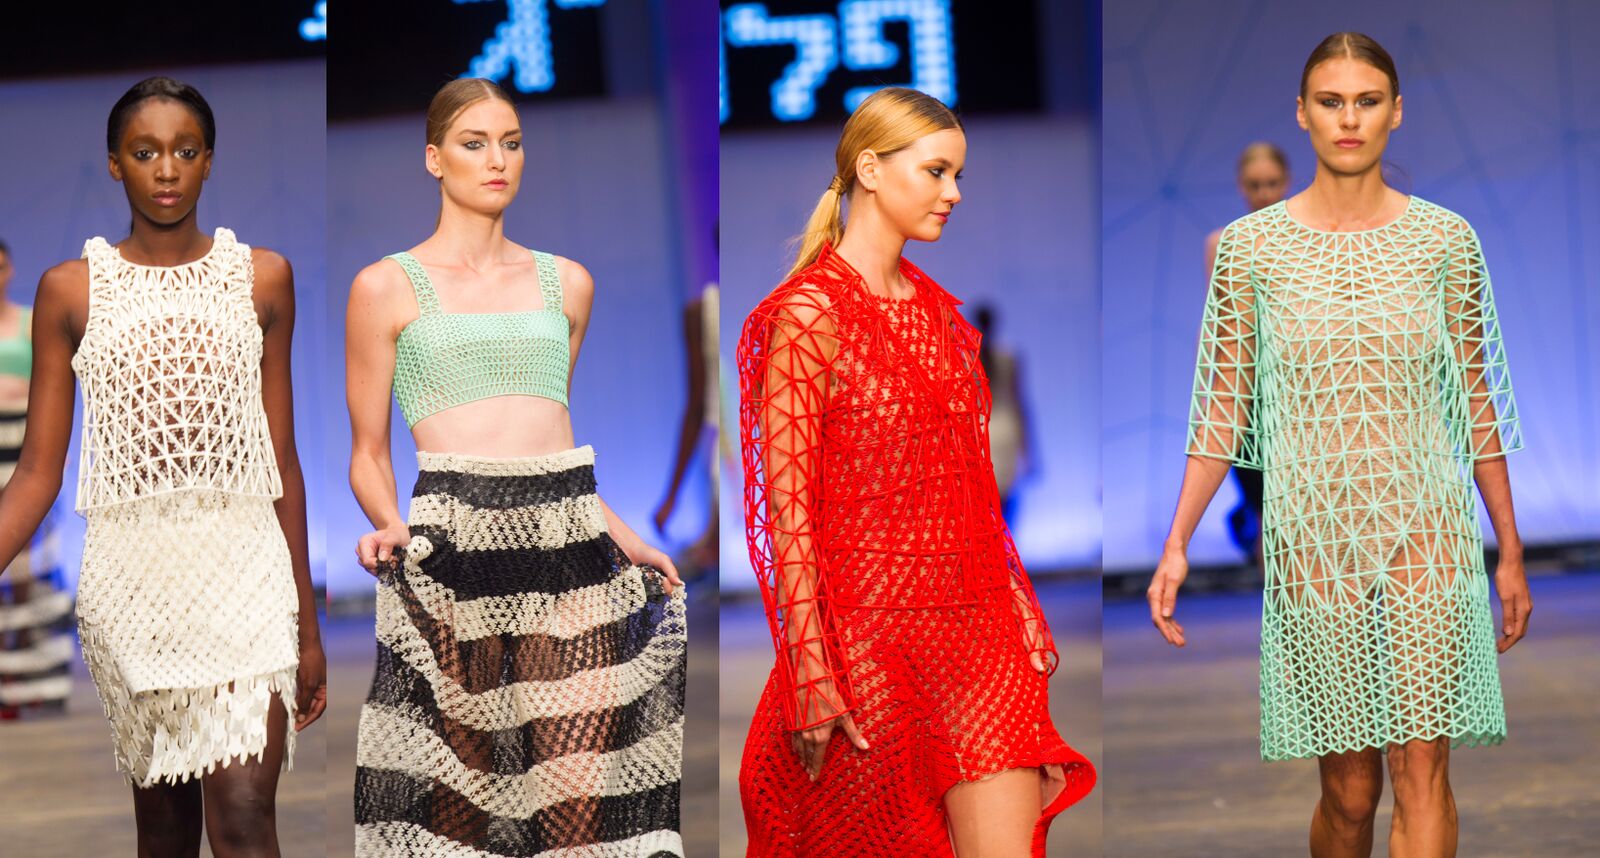 Peleg Creates First 3D Printed Fashion Collection Printed Entirely at Home - | The Voice of Printing / Manufacturing